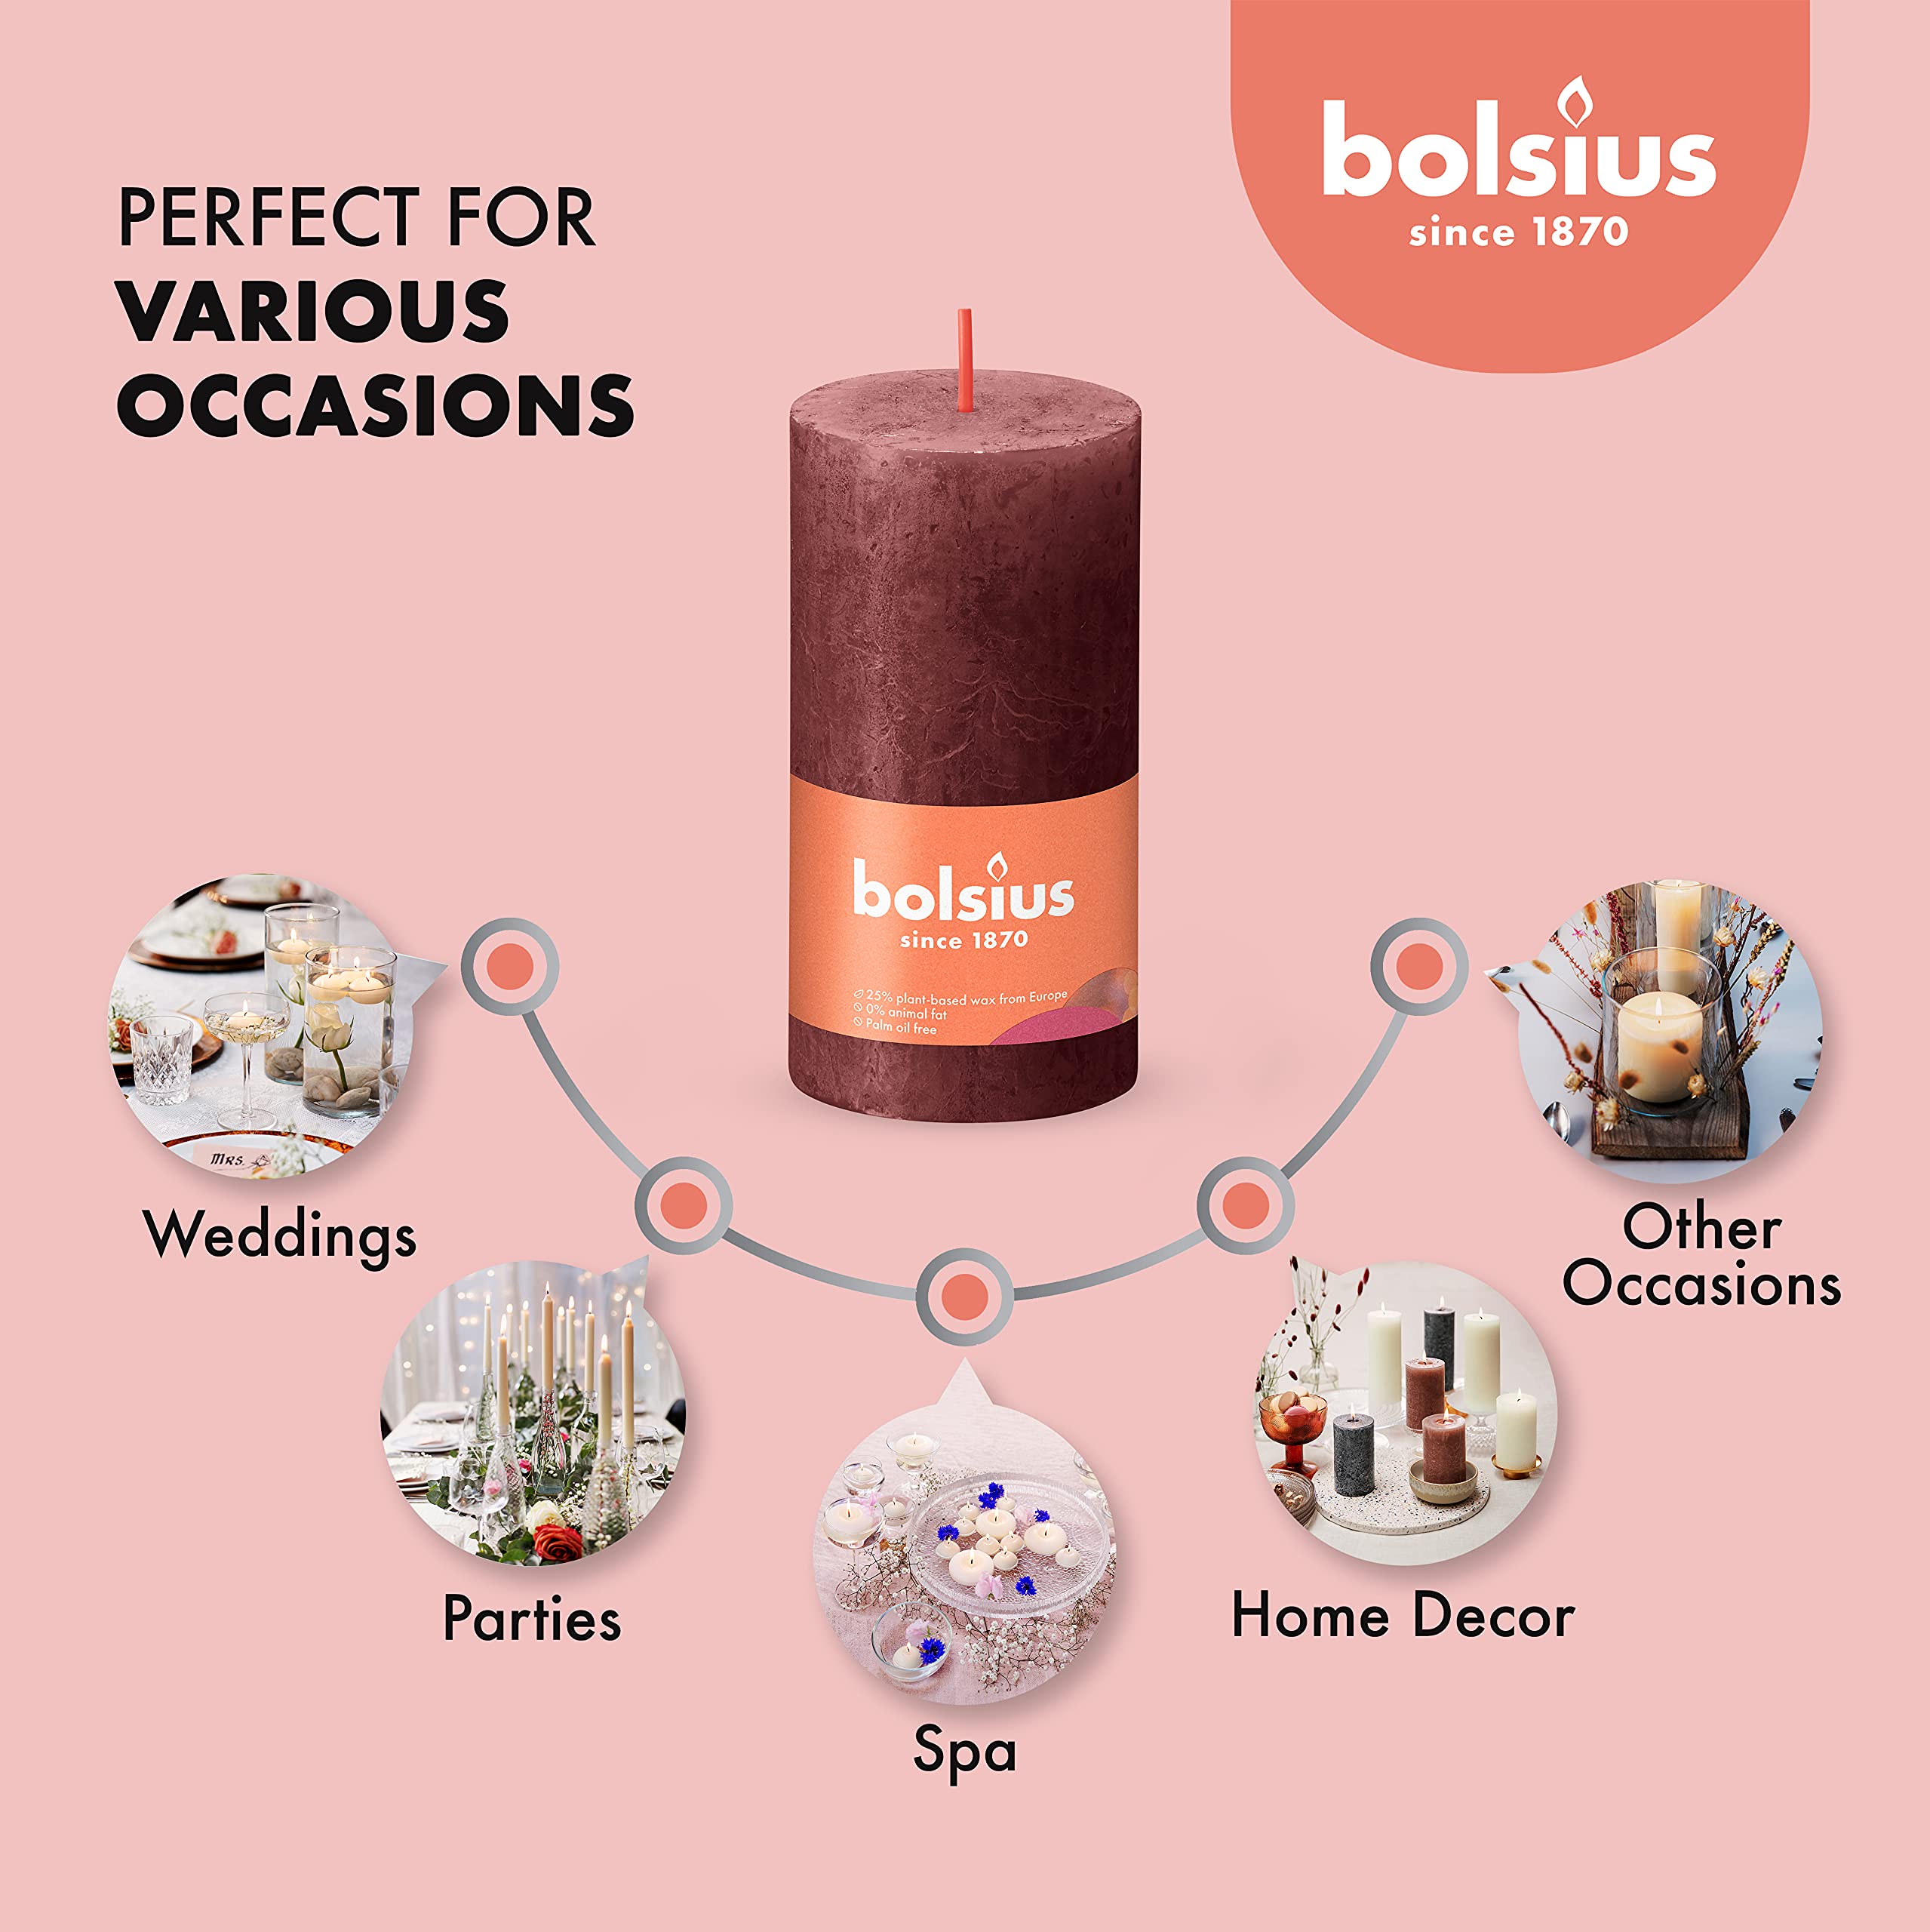 BOLSIUS 4 Pack Velvet Red Rustic Pillar Candles - 2 X 4 Inches - Premium European Quality - Includes Natural Plant-Based Wax - Unscented Dripless Smokeless 30 Hour Party D�cor and Wedding Candles  - Like New